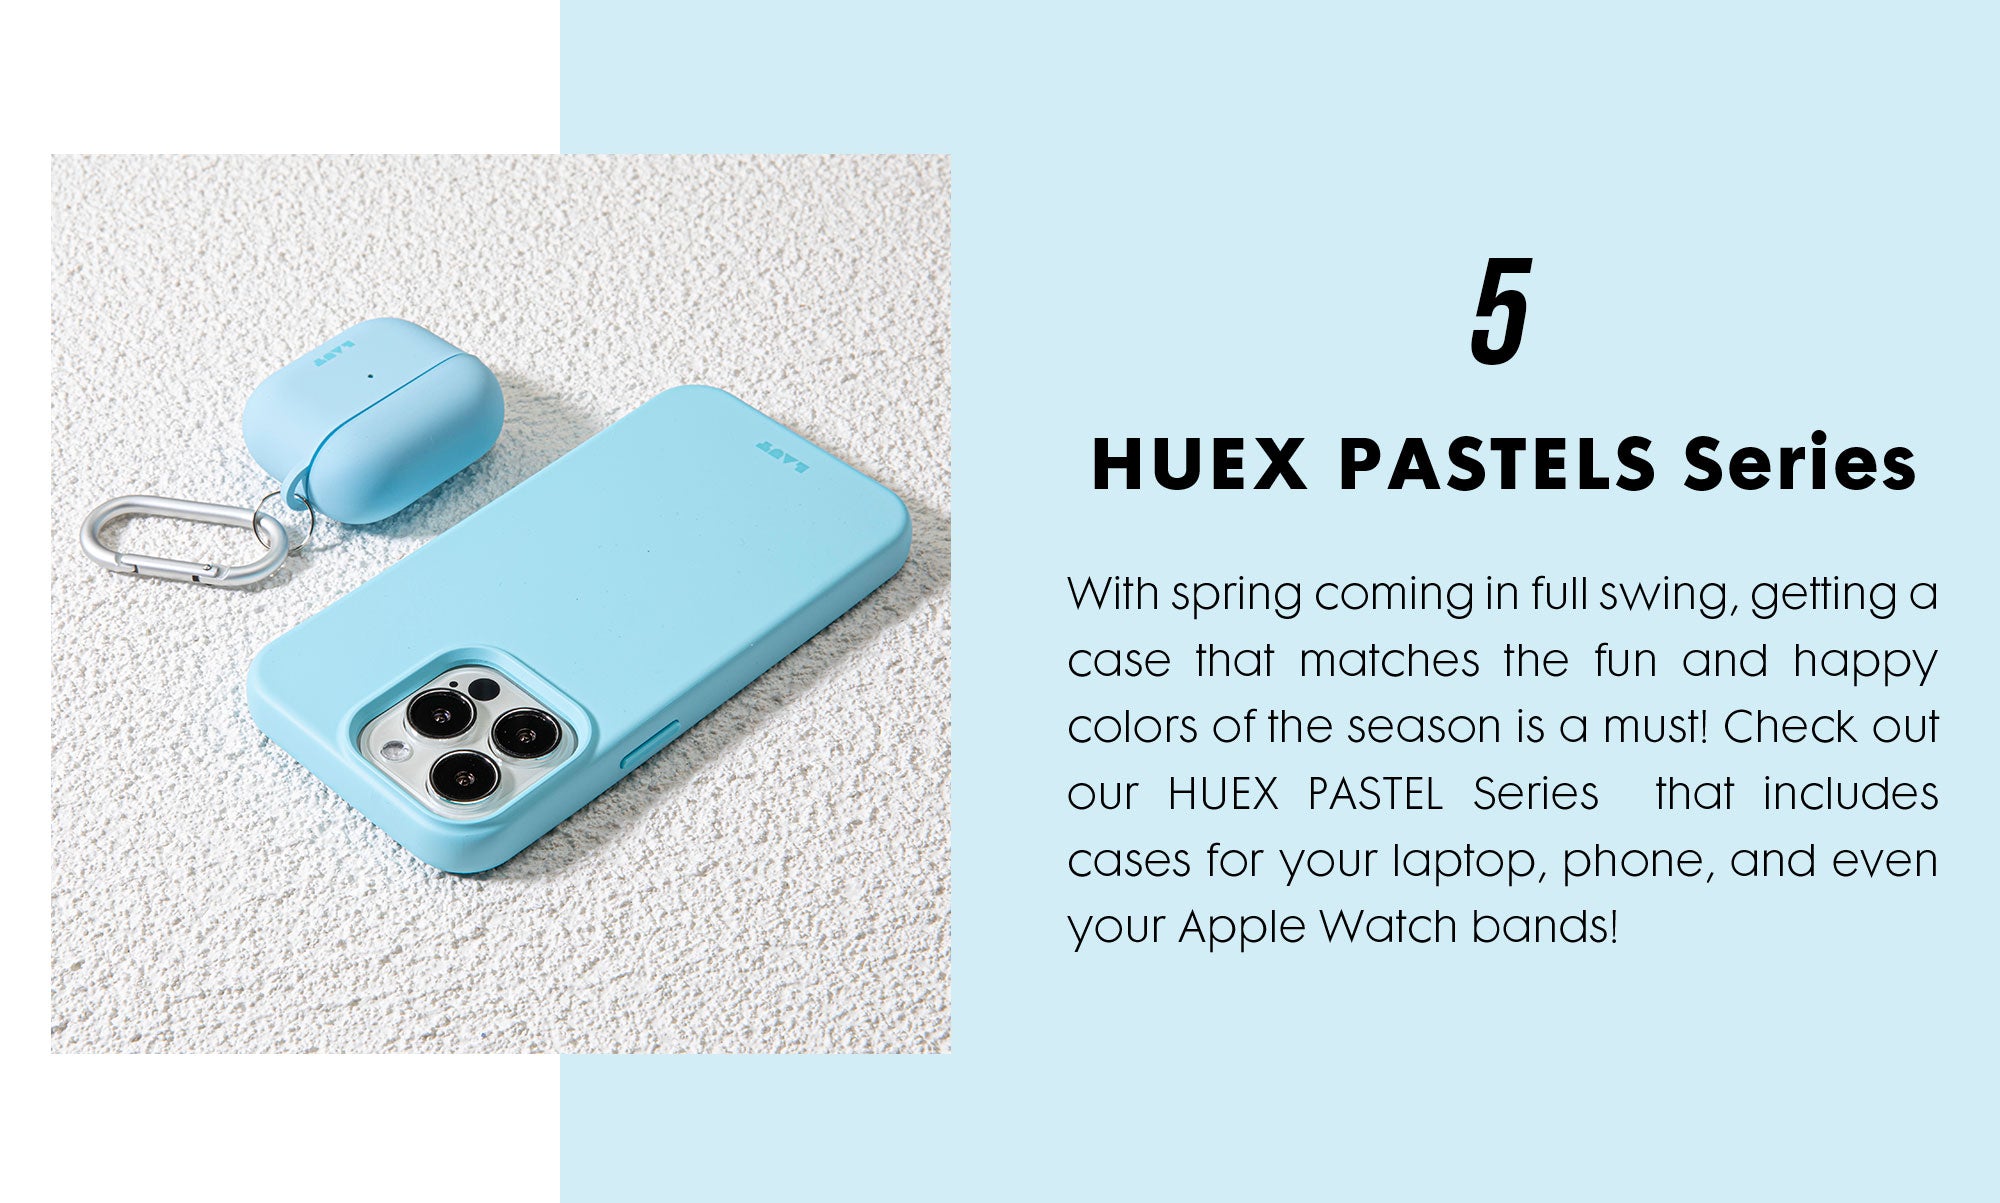 HUEX PASTELS Series - With spring coming in full swing, getting a case that matches the fun and happy colors of the season is a must! Check out our HUEX PASTEL Series  that includes cases for your laptop, phone, and even your Apple Watch bands!